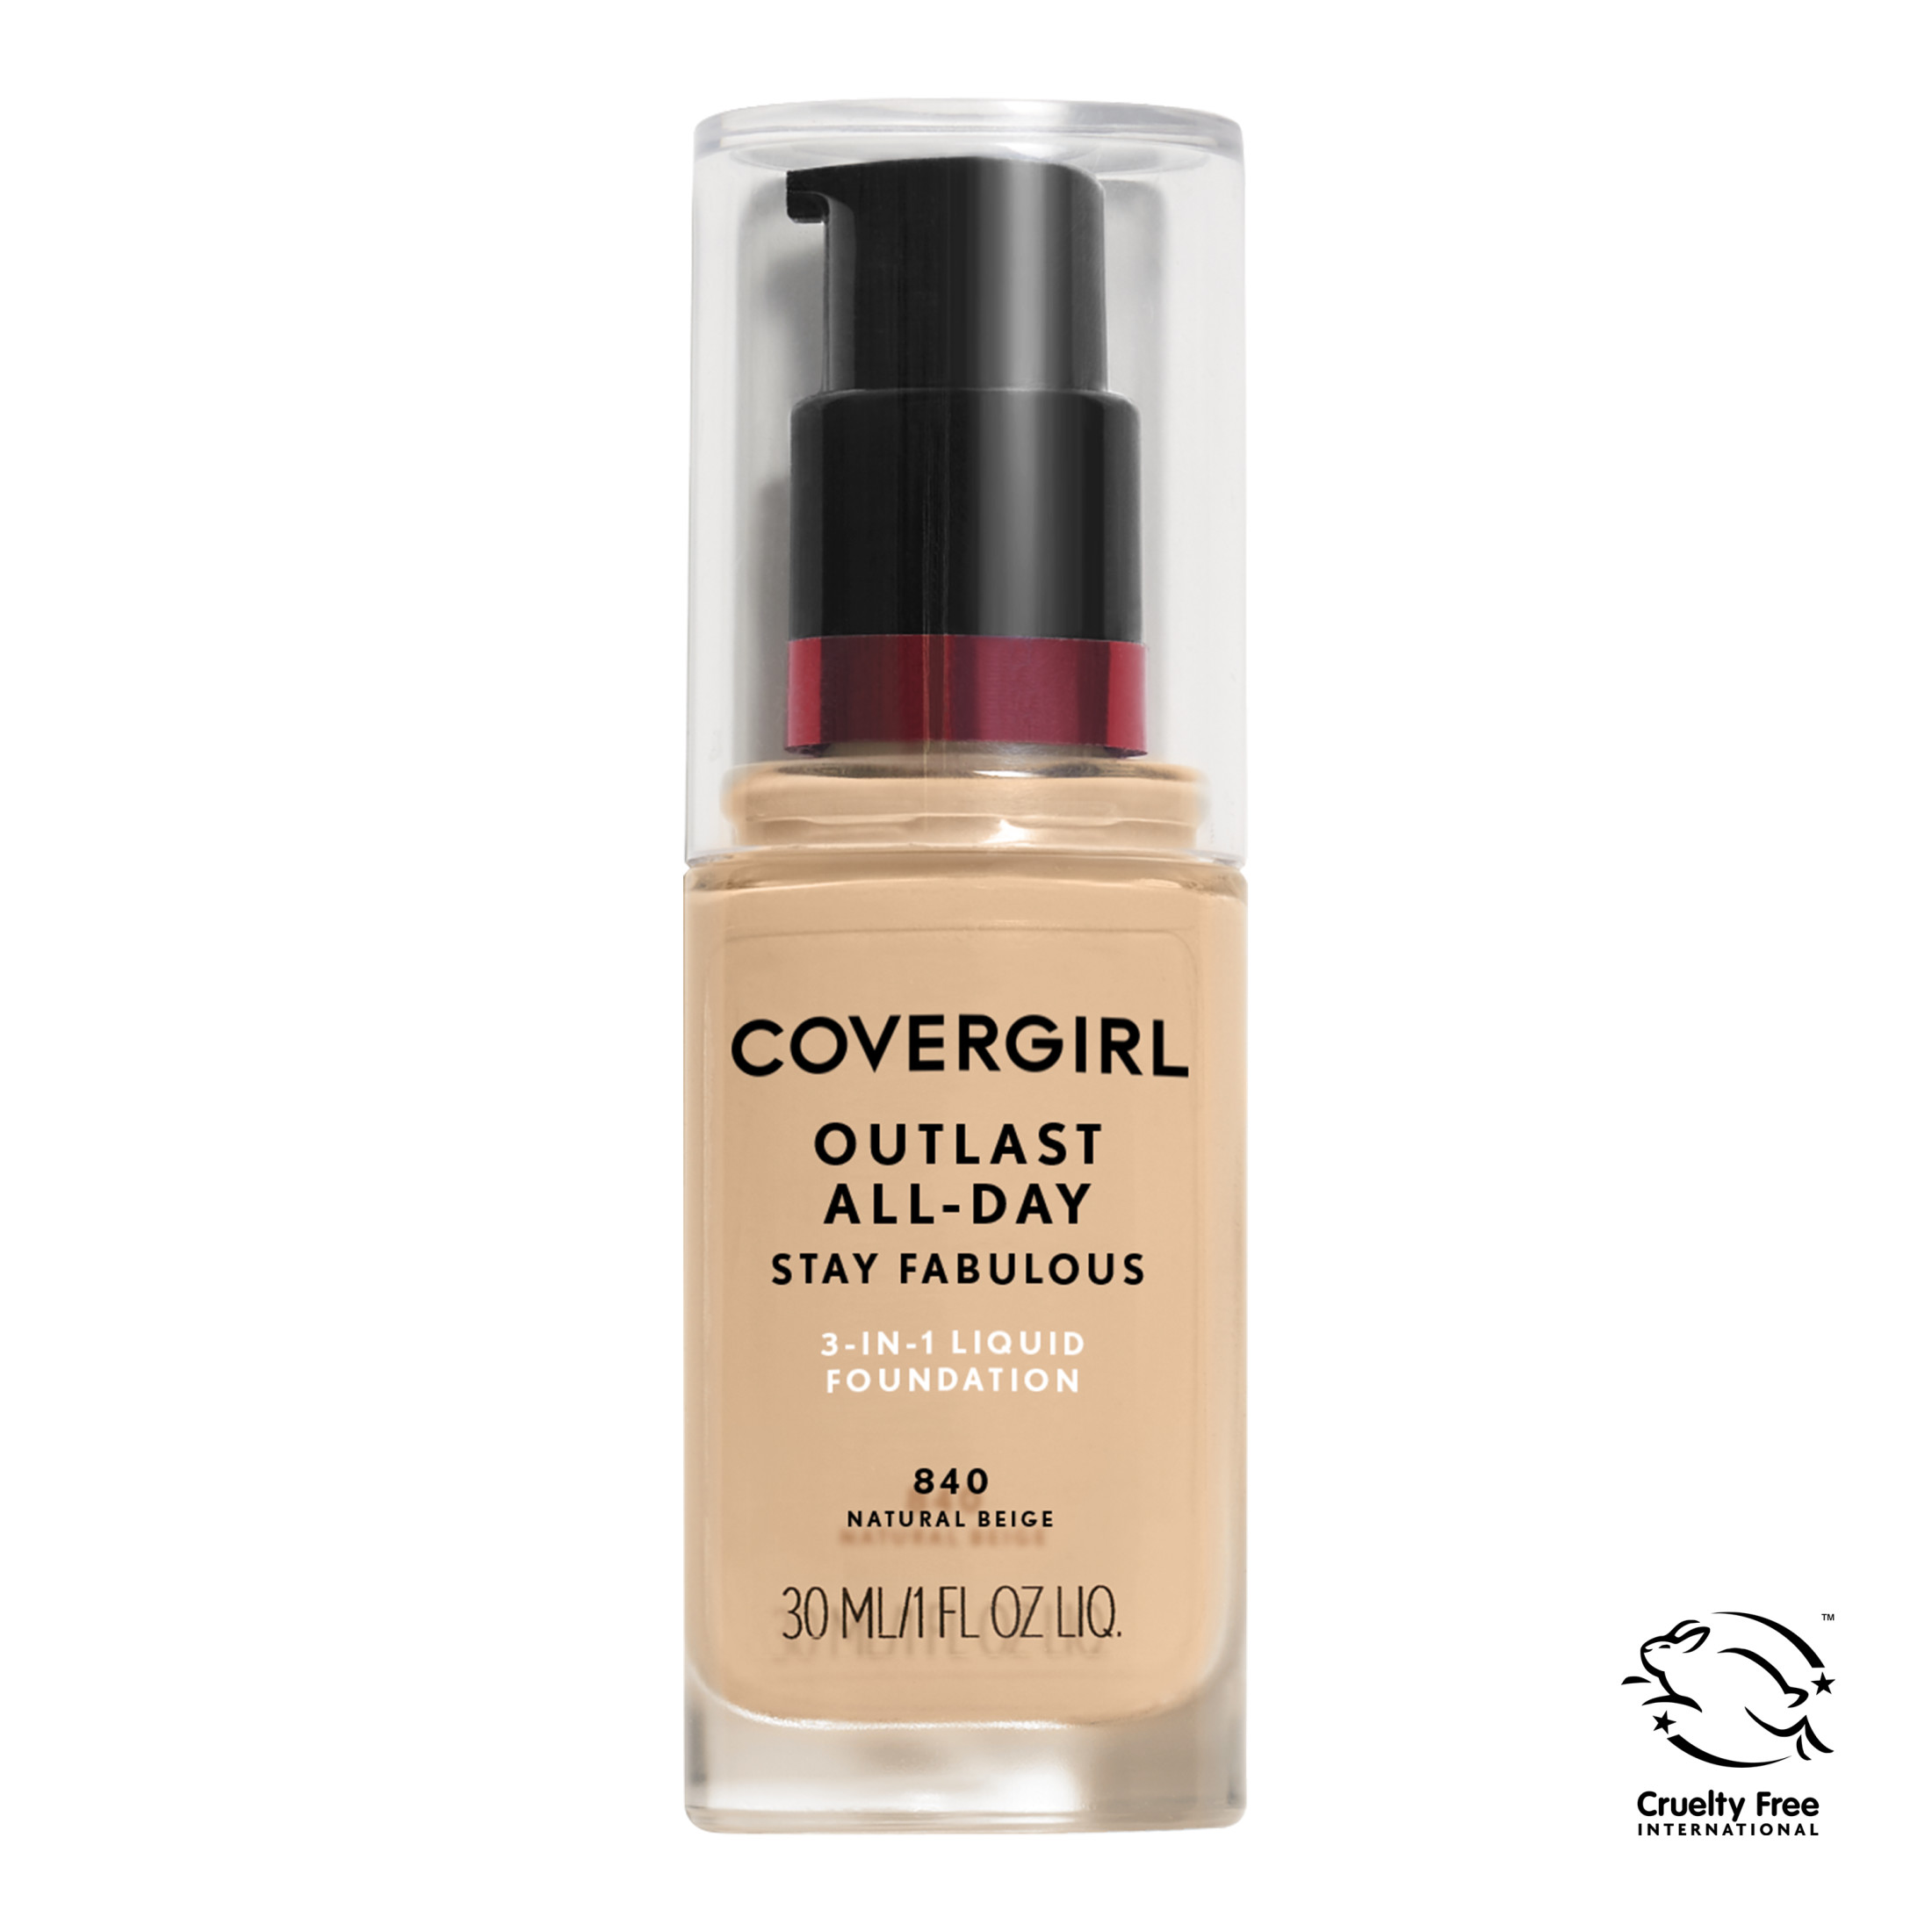 COVERGIRL Outlast All-Day Stay Fabulous 3-in-1 Foundation, 820 Creamy Natural - image 1 of 11